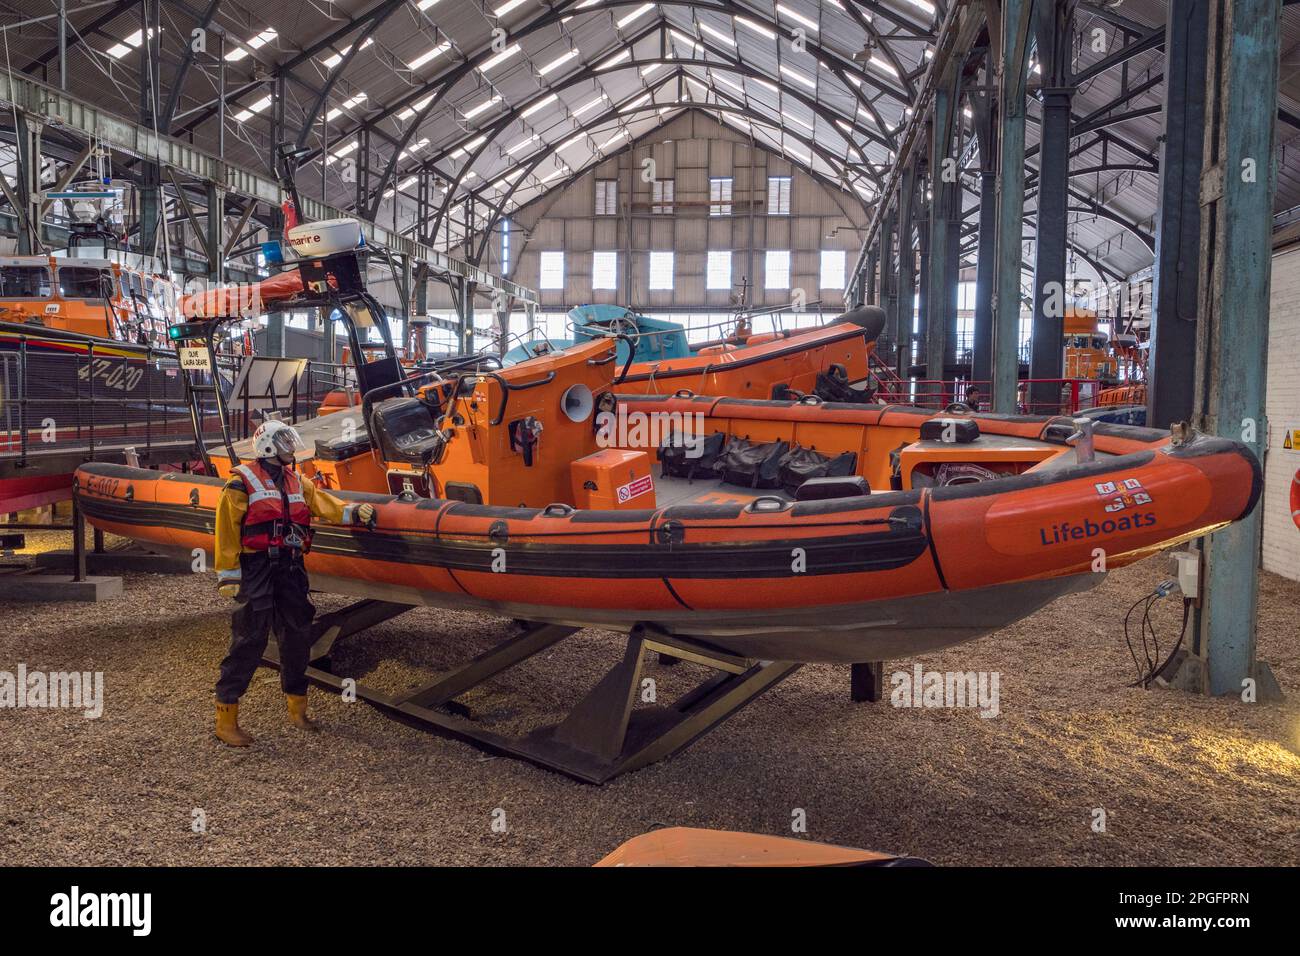 The 'Olive Laura Deare' MK1 E Class lifeboat in the RNLI Historic Lifeboat Collection, Historic Dockyard Chatham, Kent, UK. Stock Photo